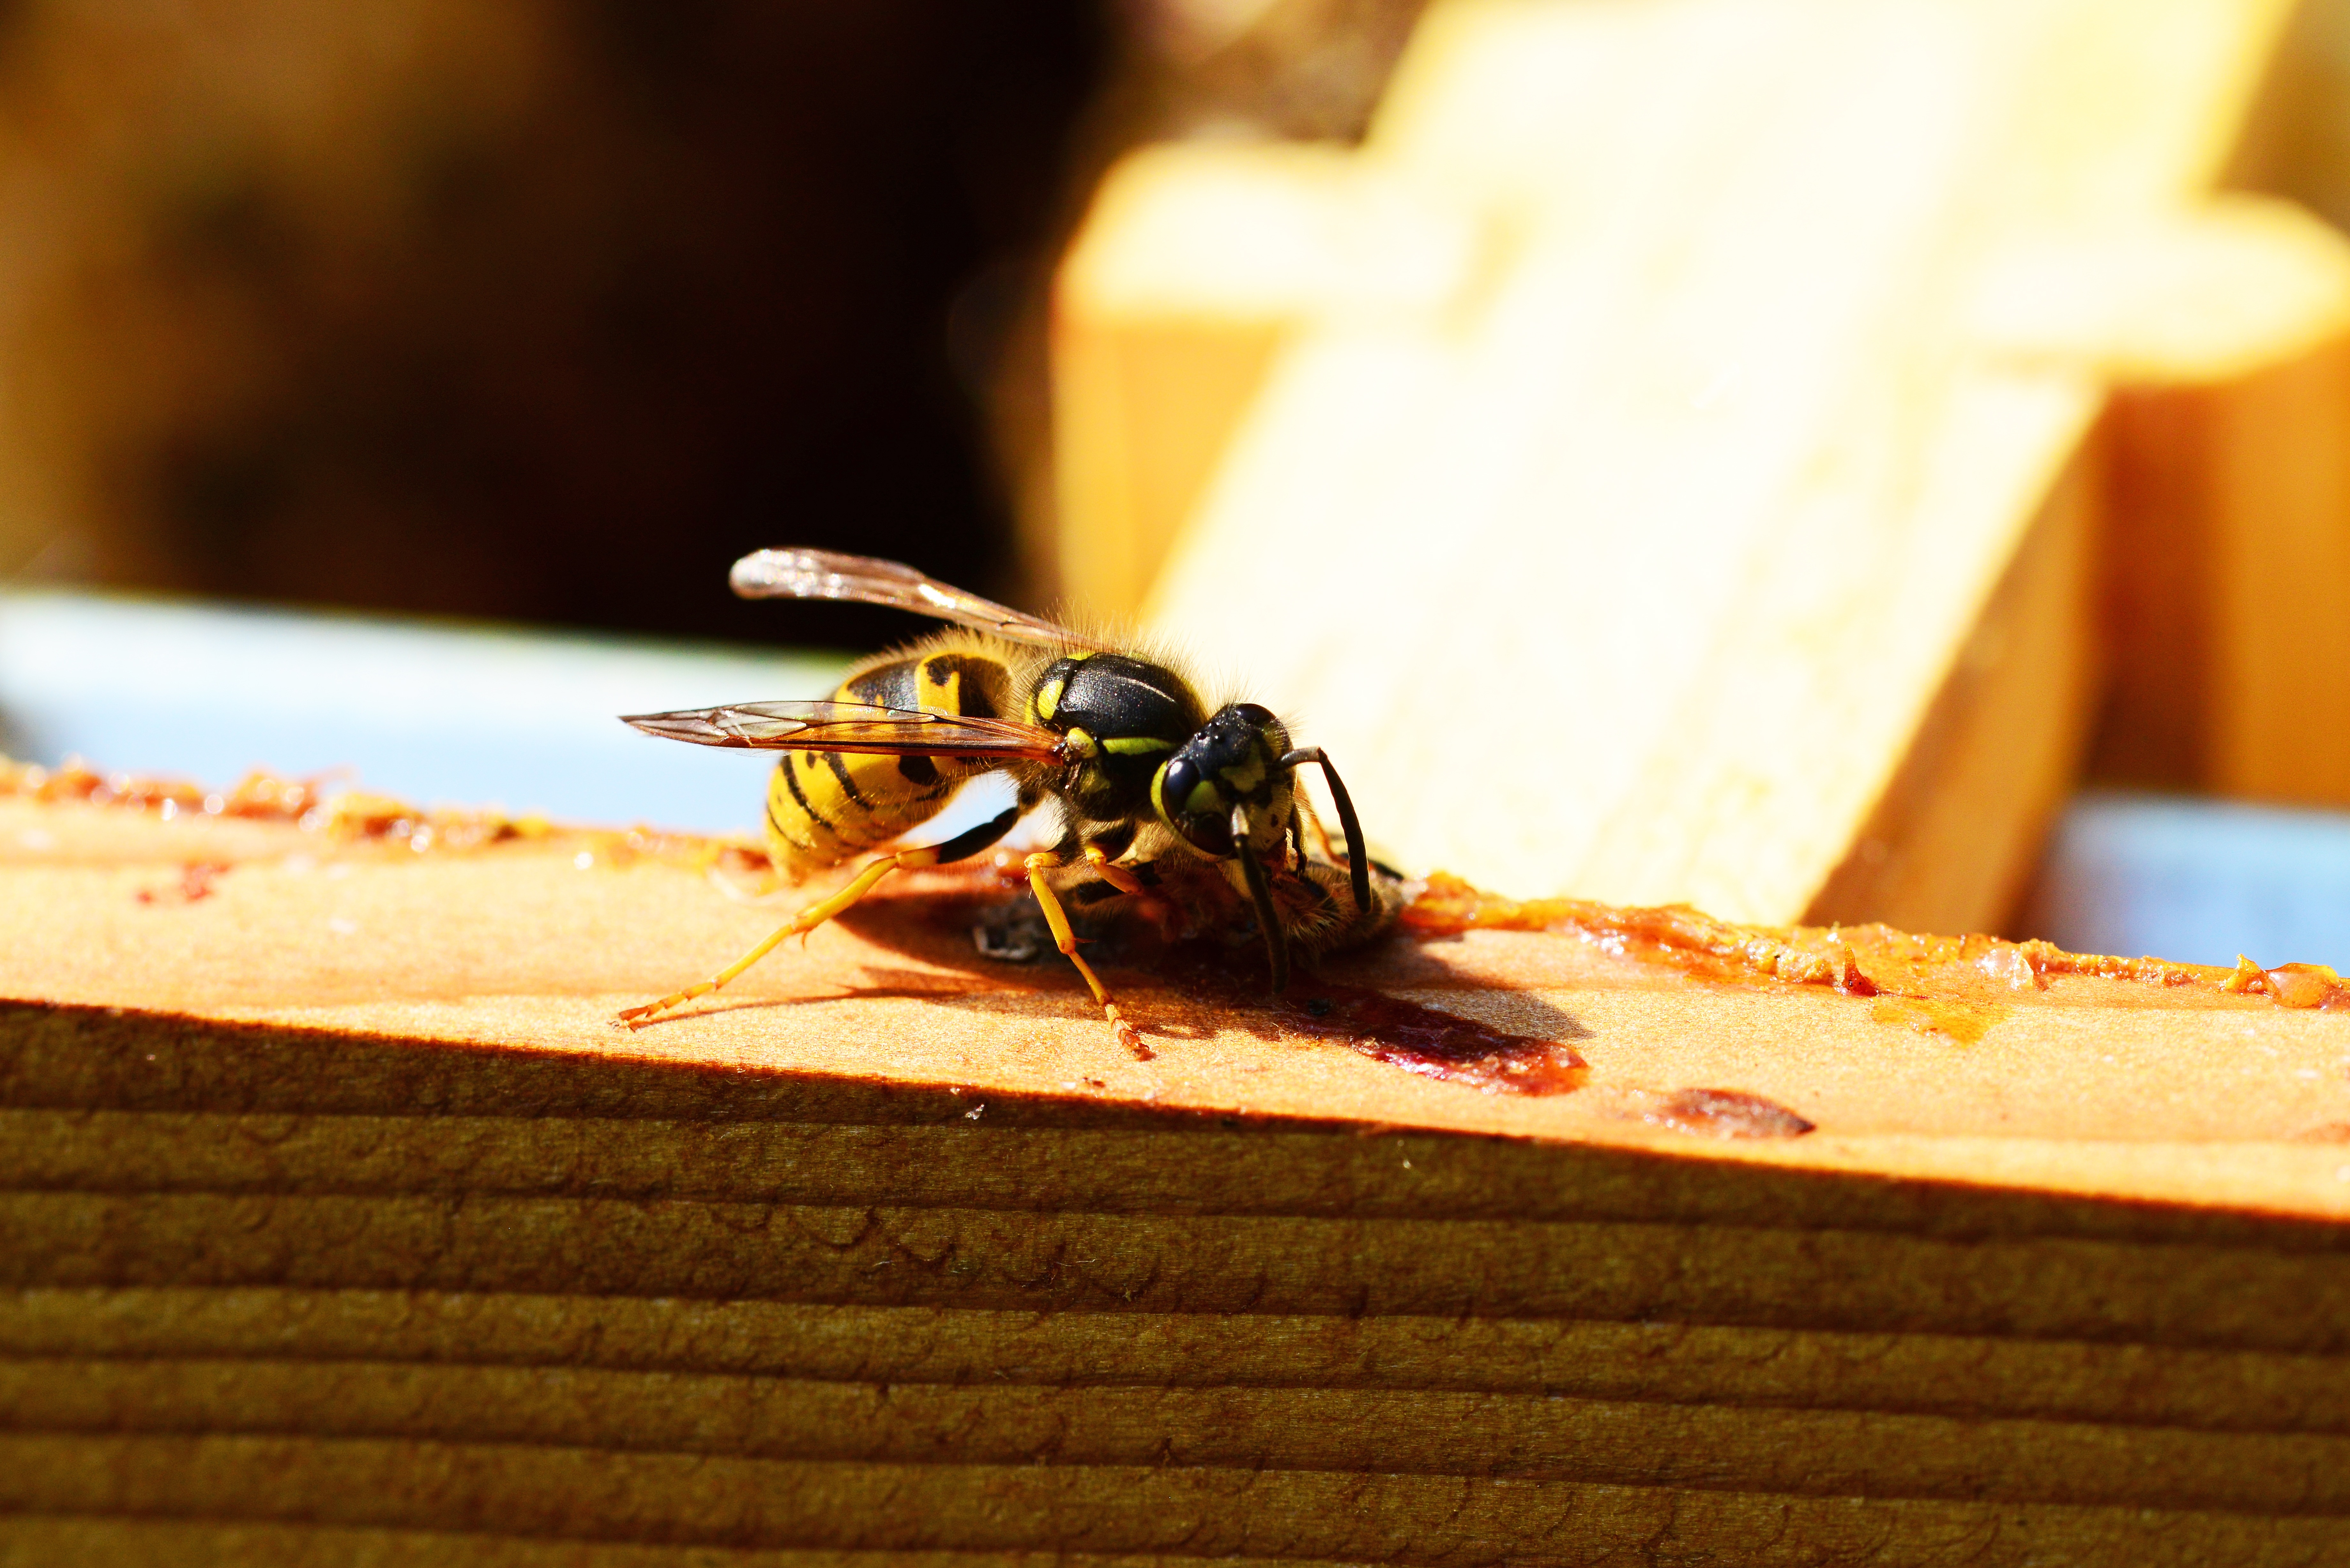 Wasp, Insect, Yellow, Black, insect, animal themes